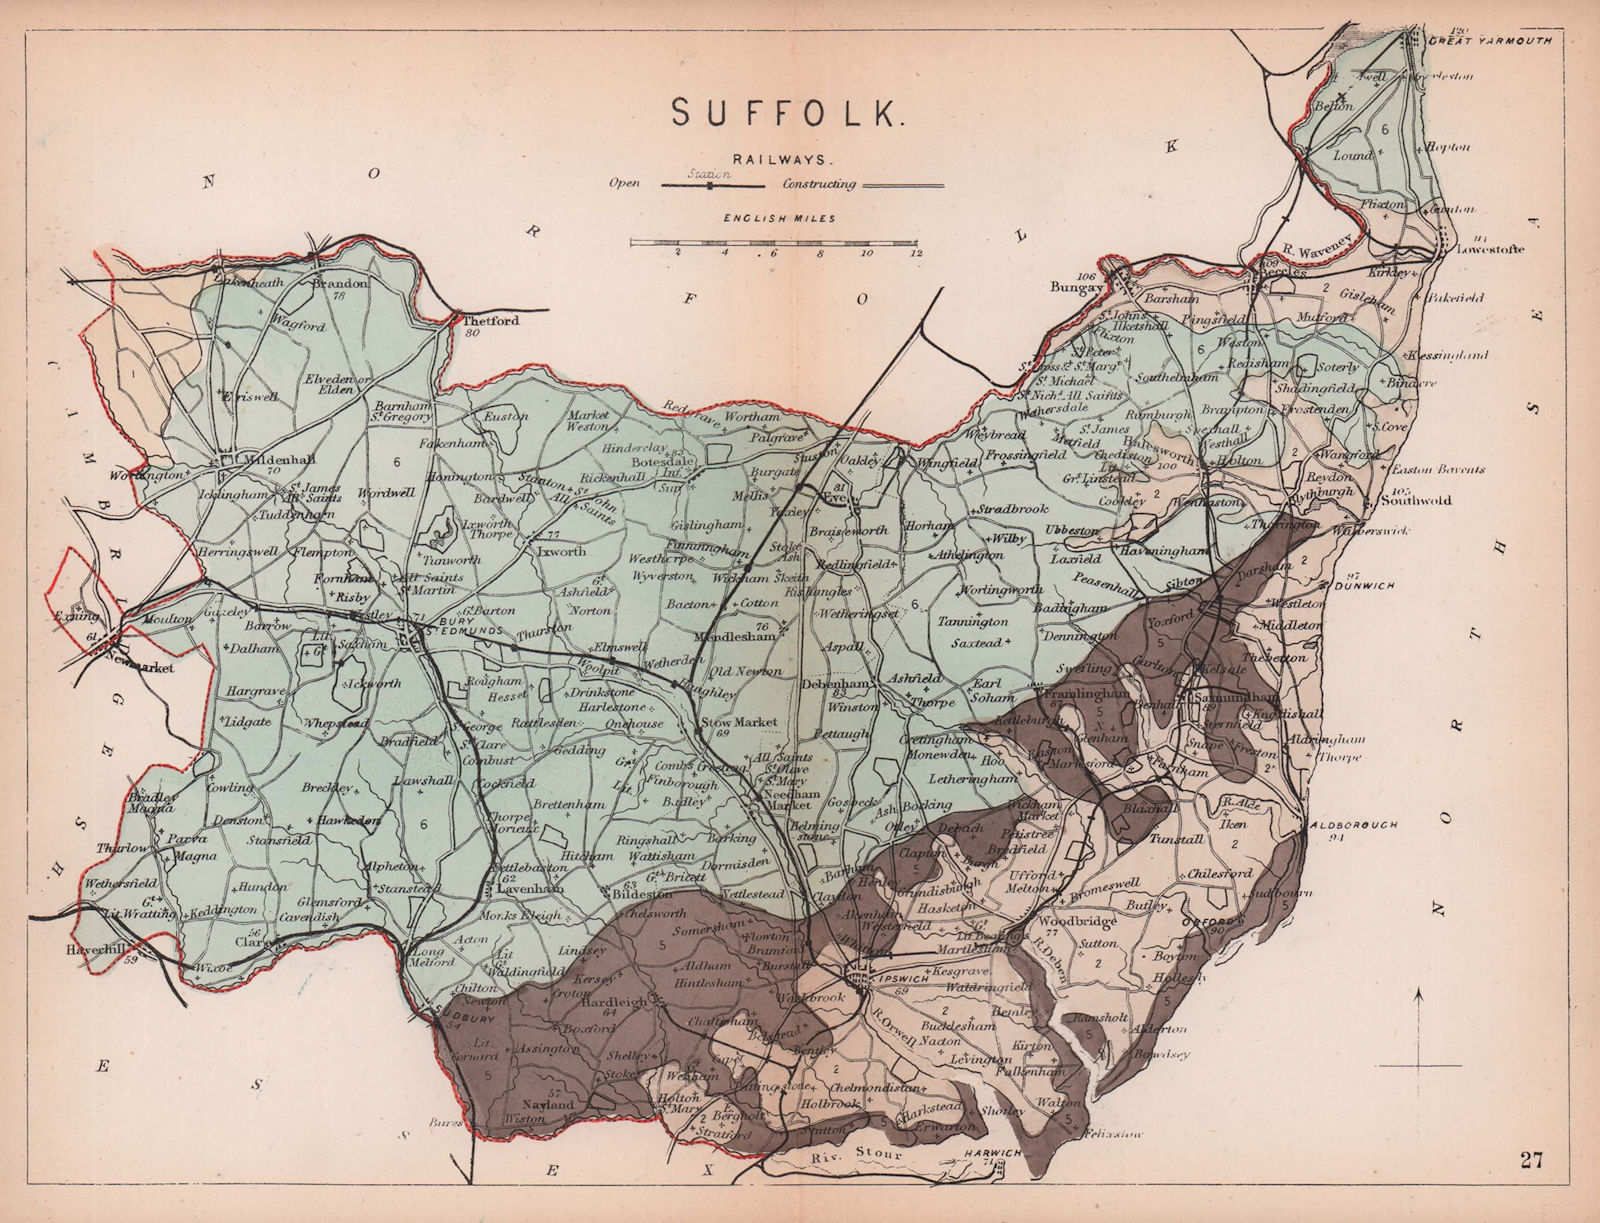 SUFFOLK antique geological county map by James Reynolds 1864